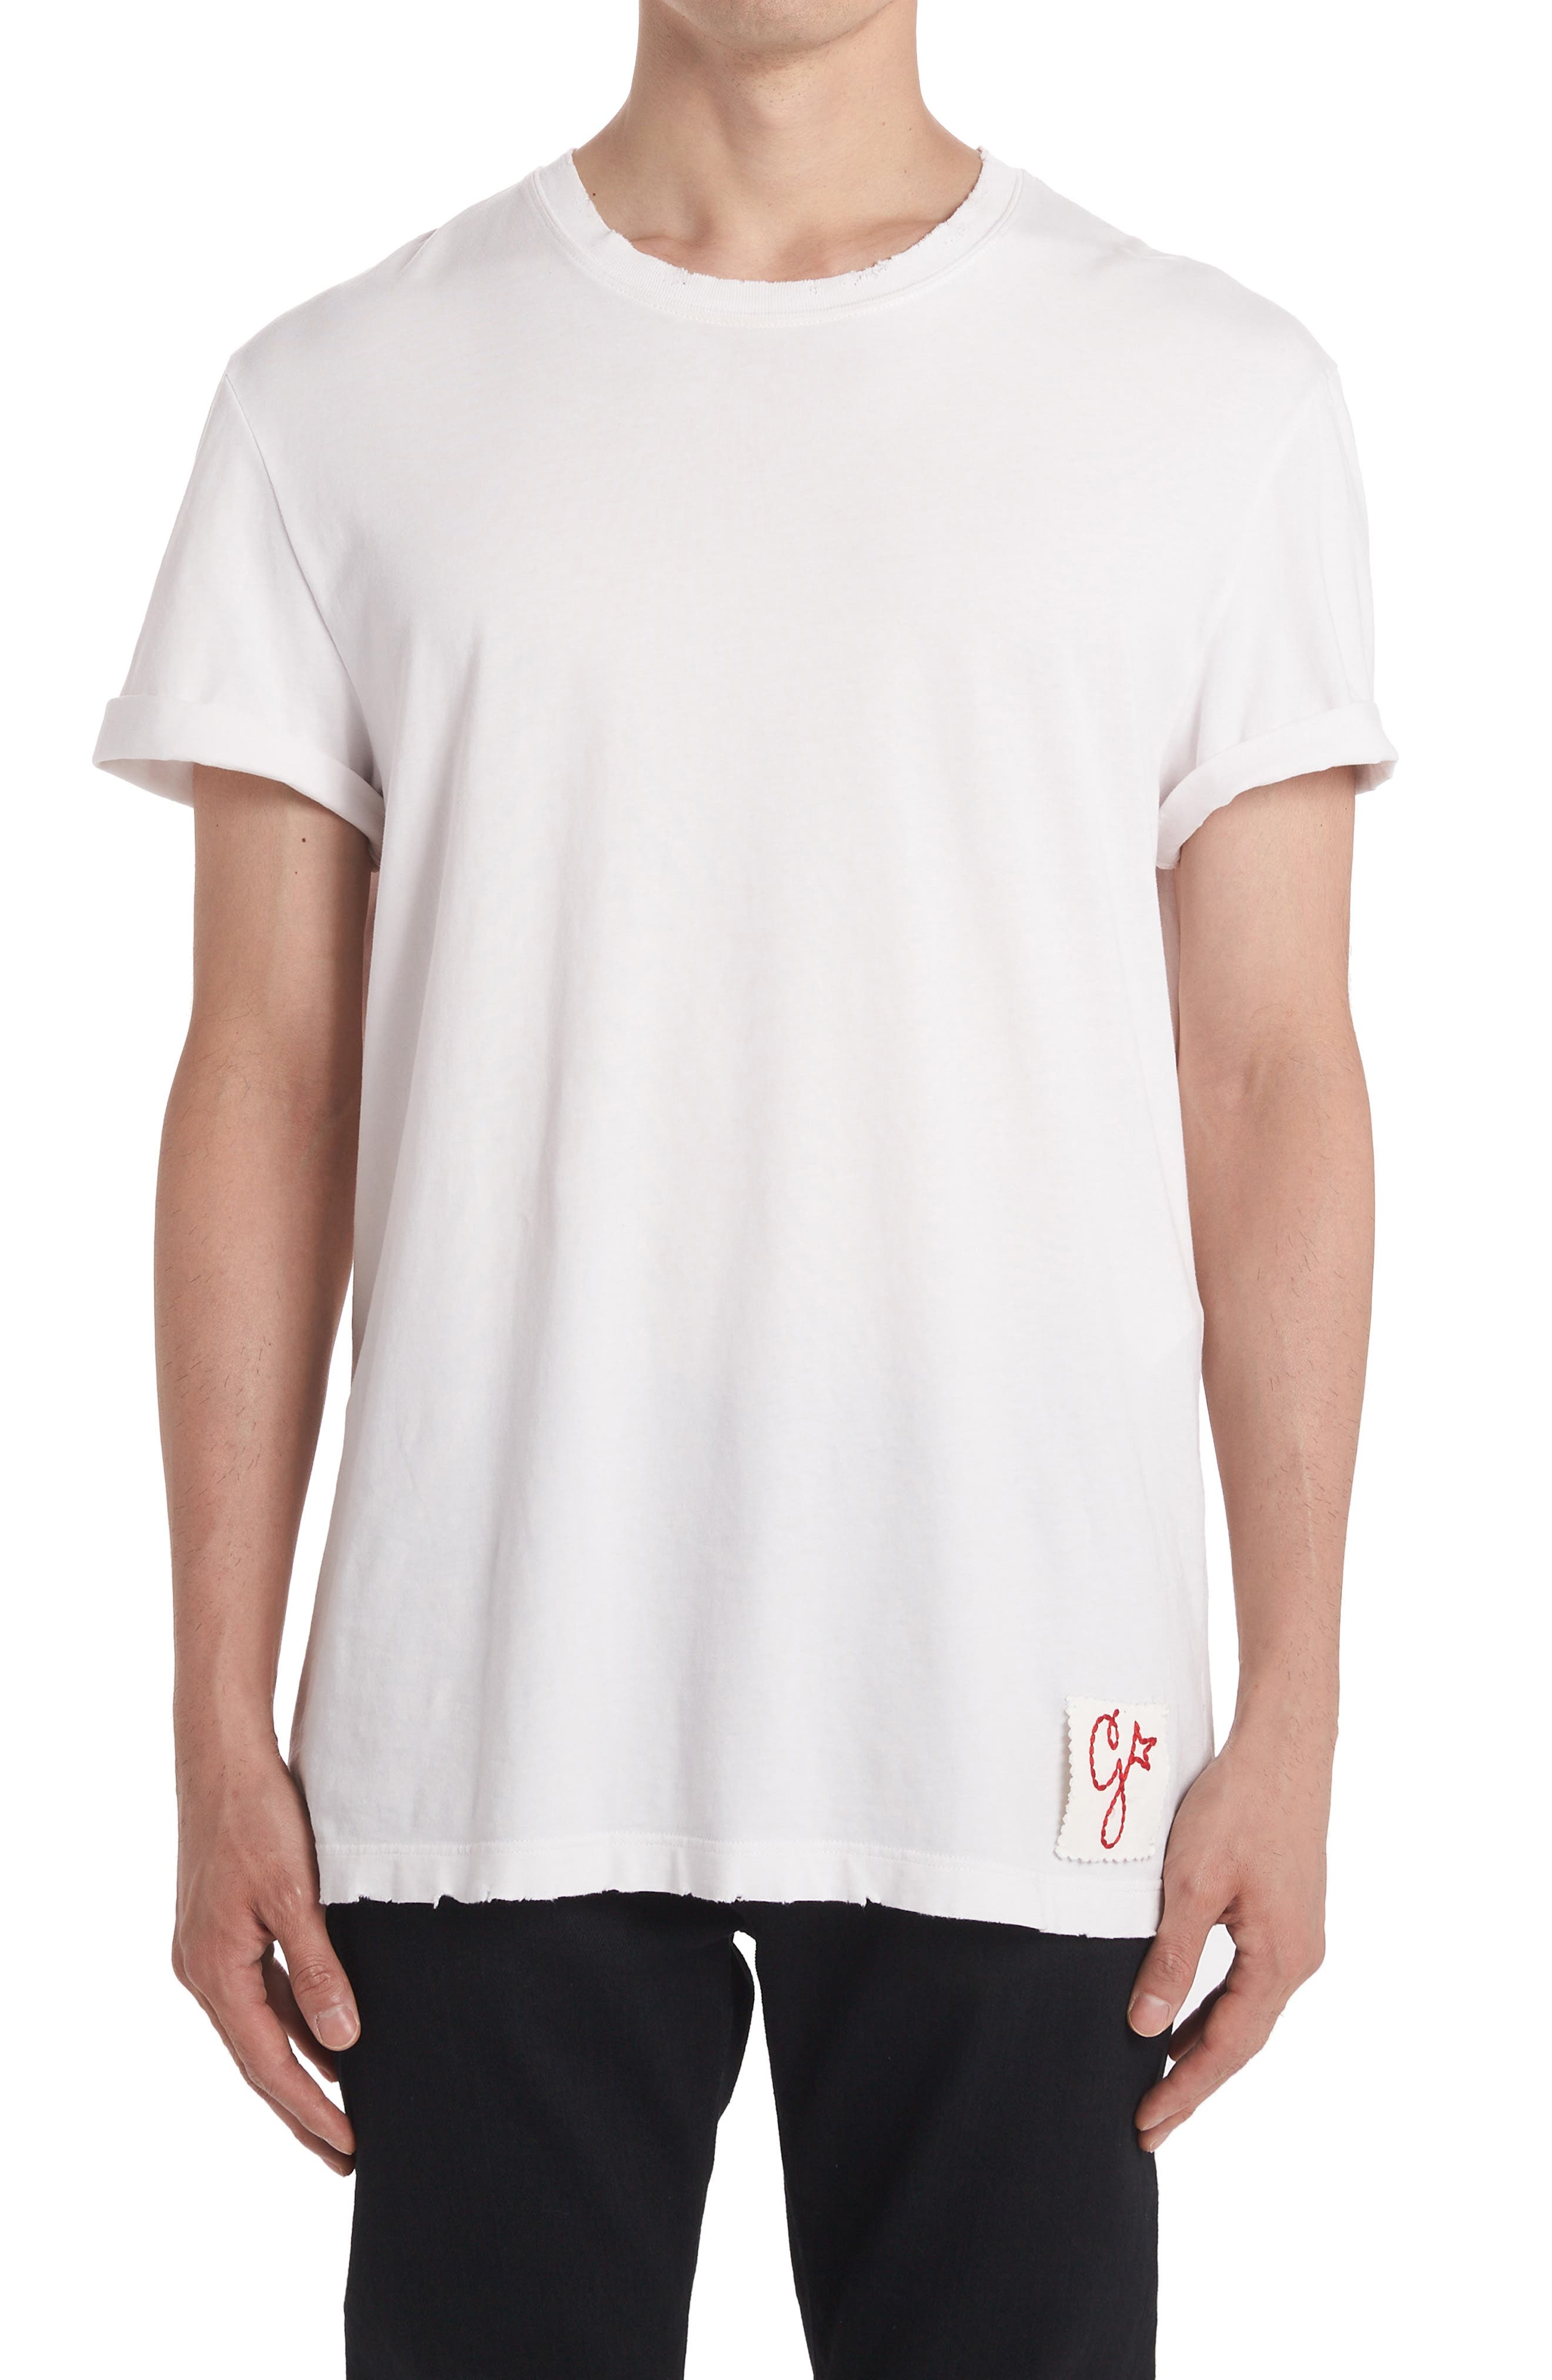 Golden Goose Distressed Cotton T-Shirt in White at Nordstrom, Size X-Large